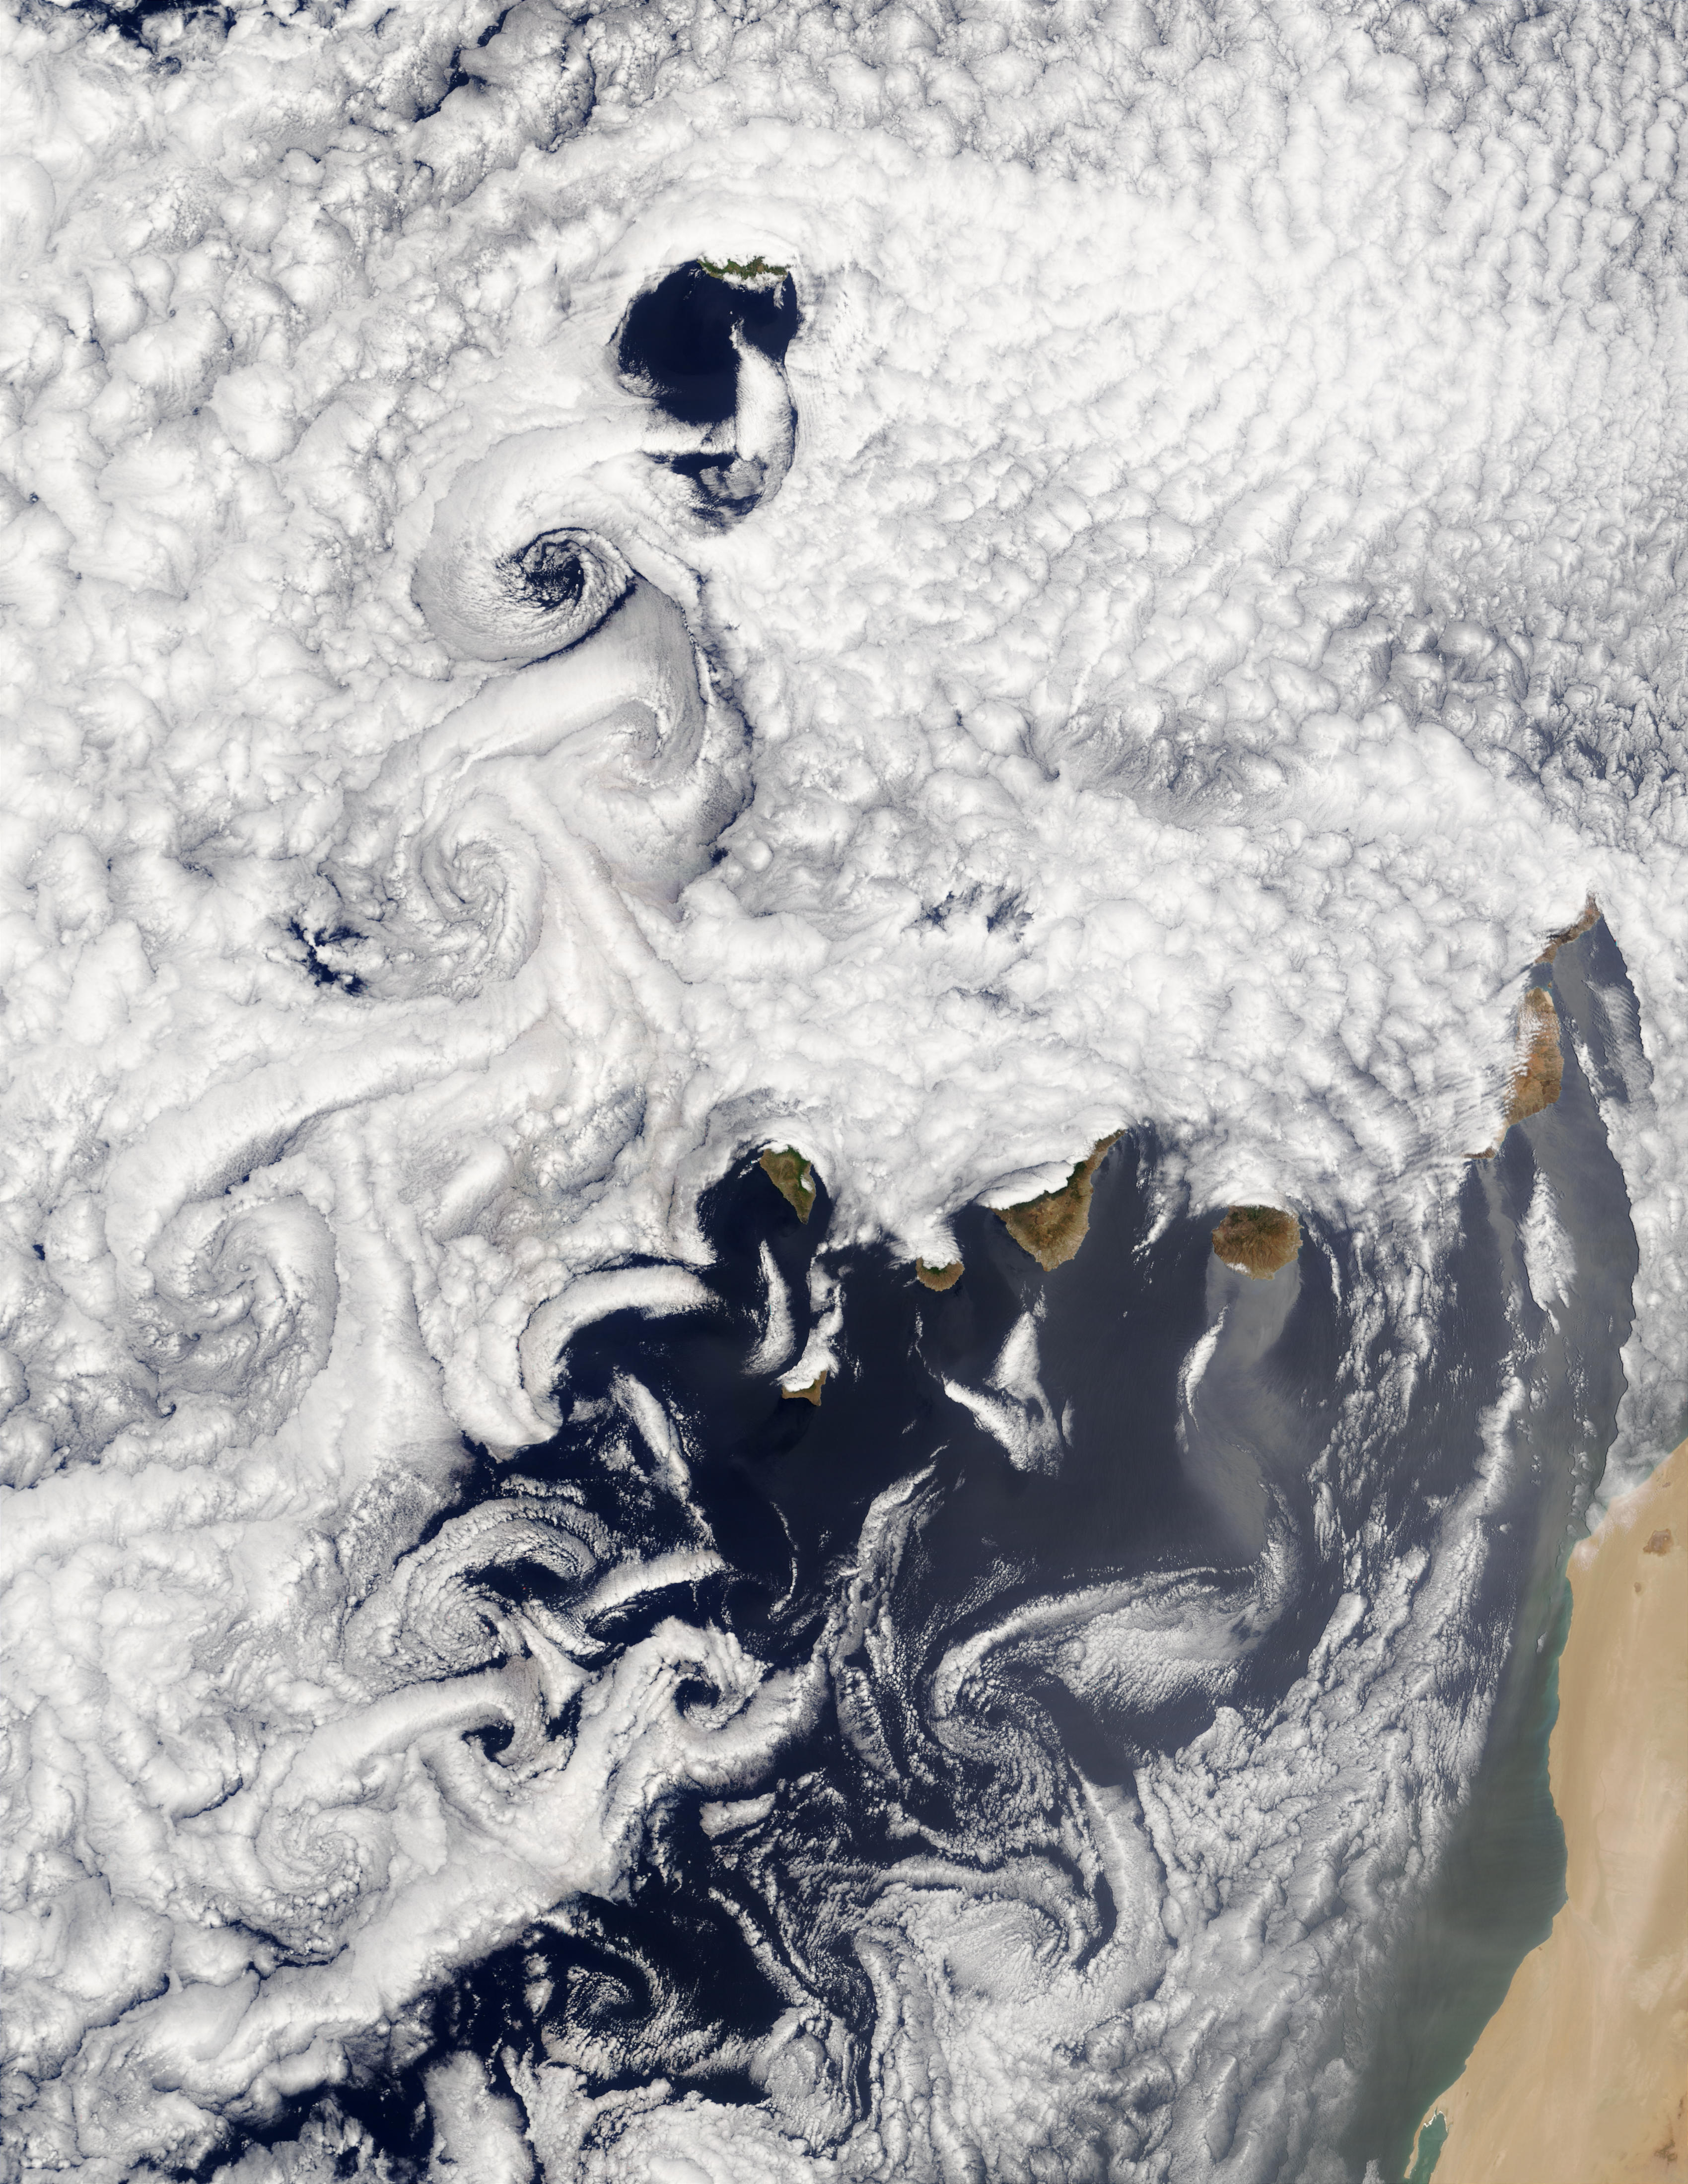 Vortex street near Canary Islands - related image preview